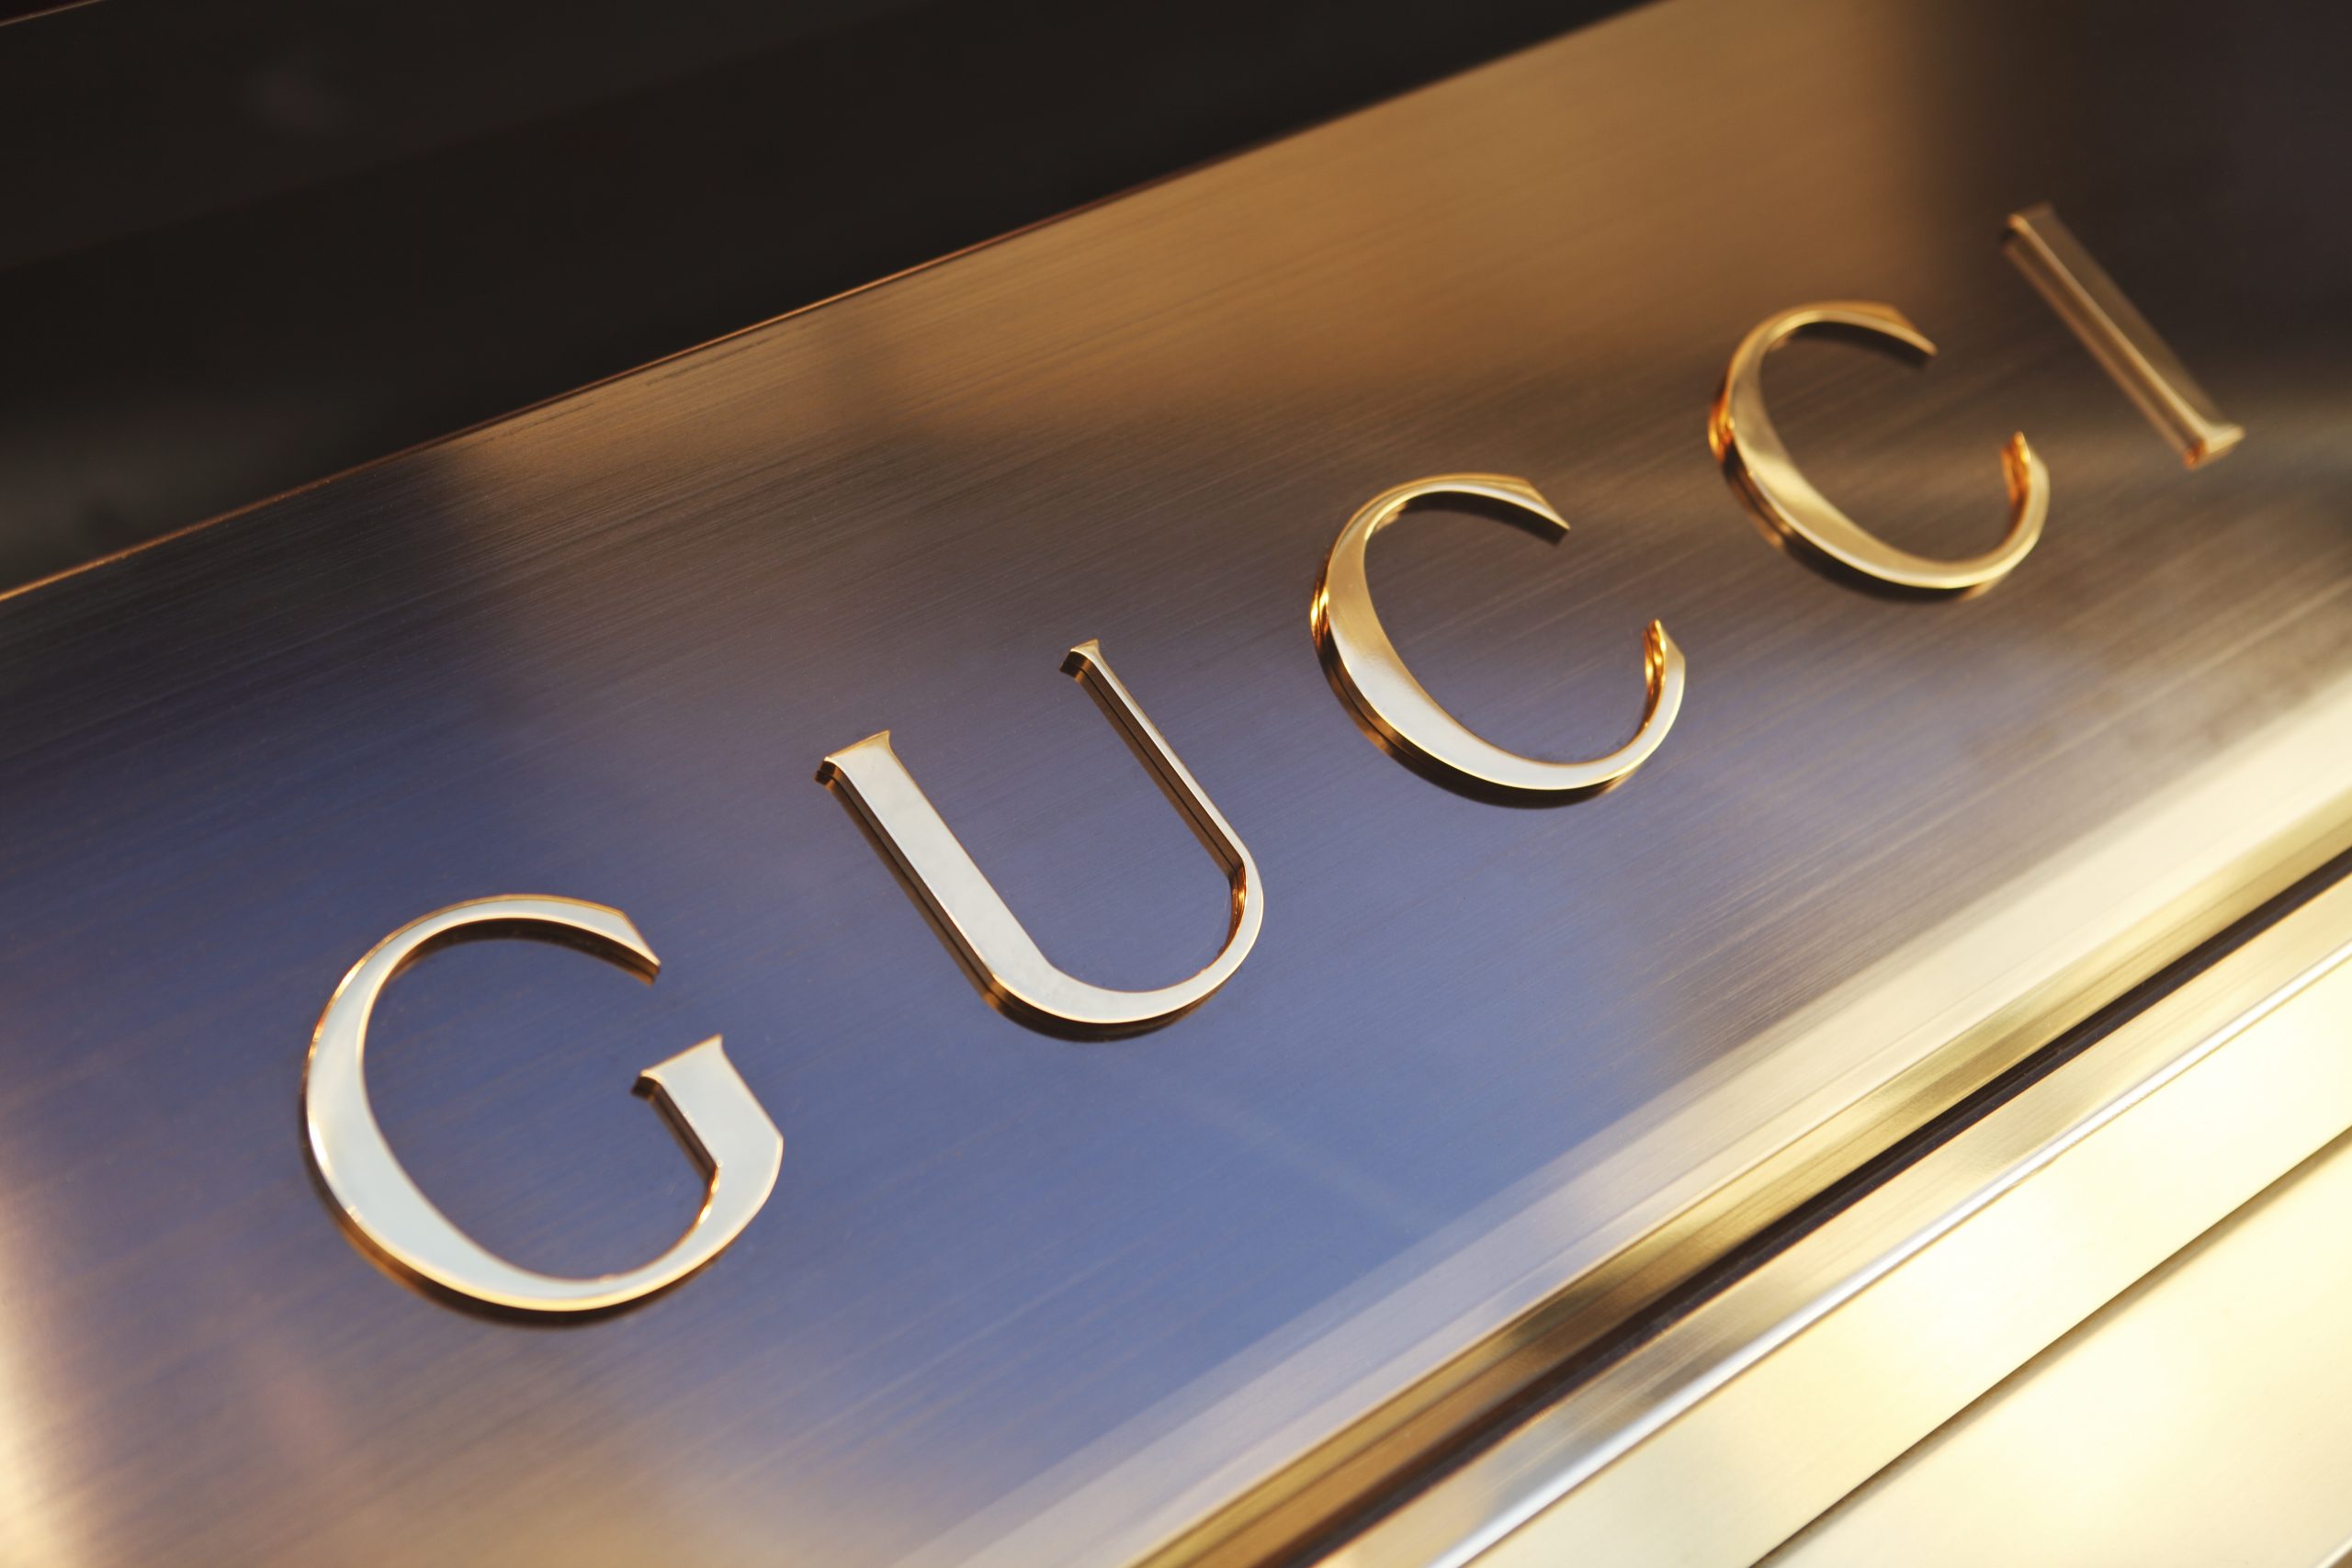 Designer brand Gucci to open cocktail bar in Florence